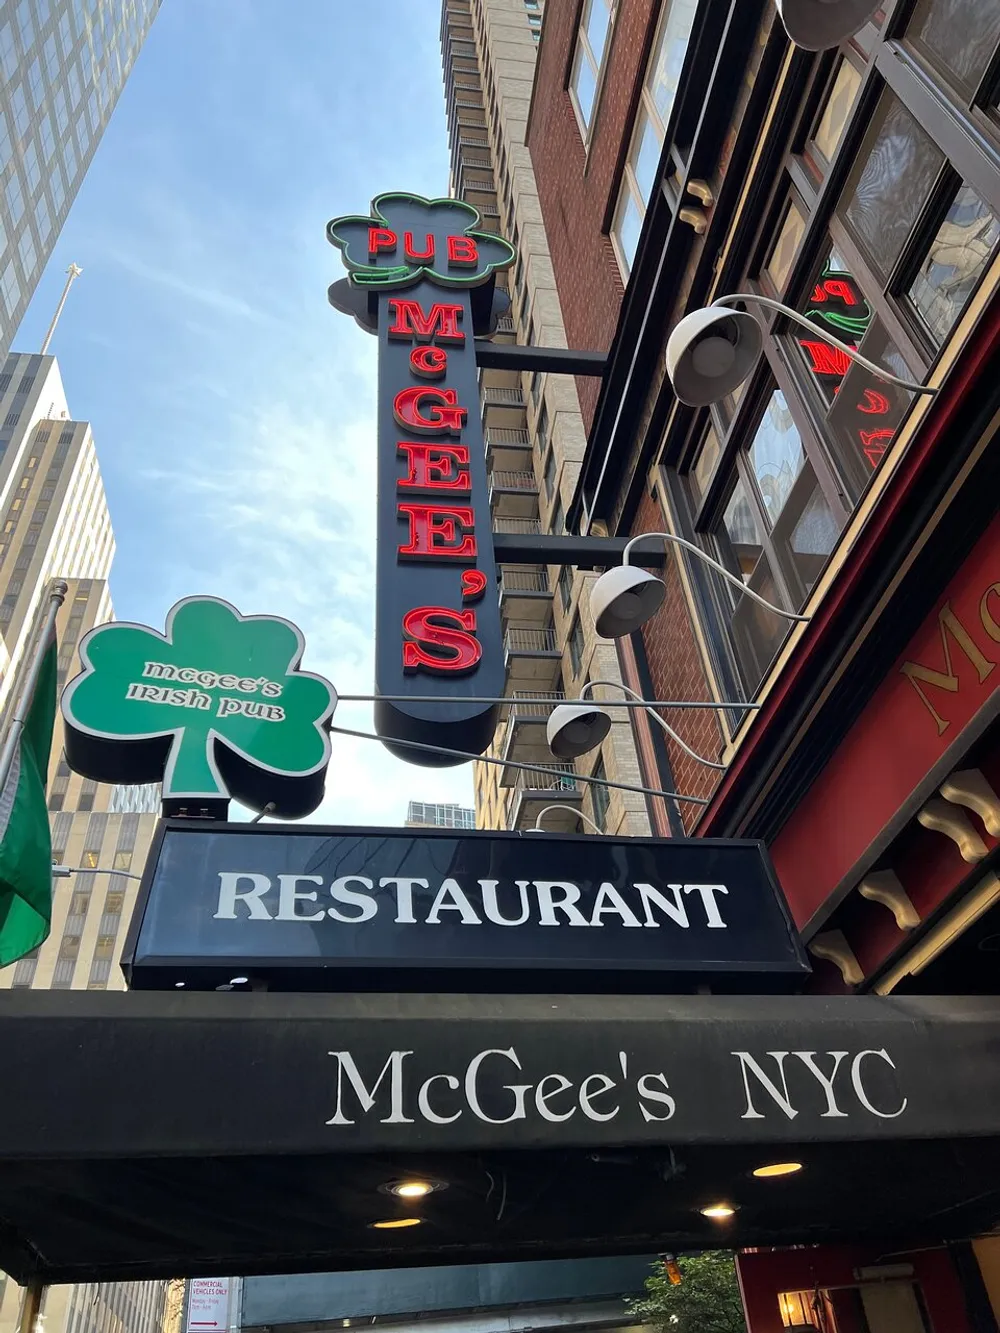 The image shows the exterior signage of McGees Irish Pub and Restaurant in New York City with multiple green shamrock designs and neon lights